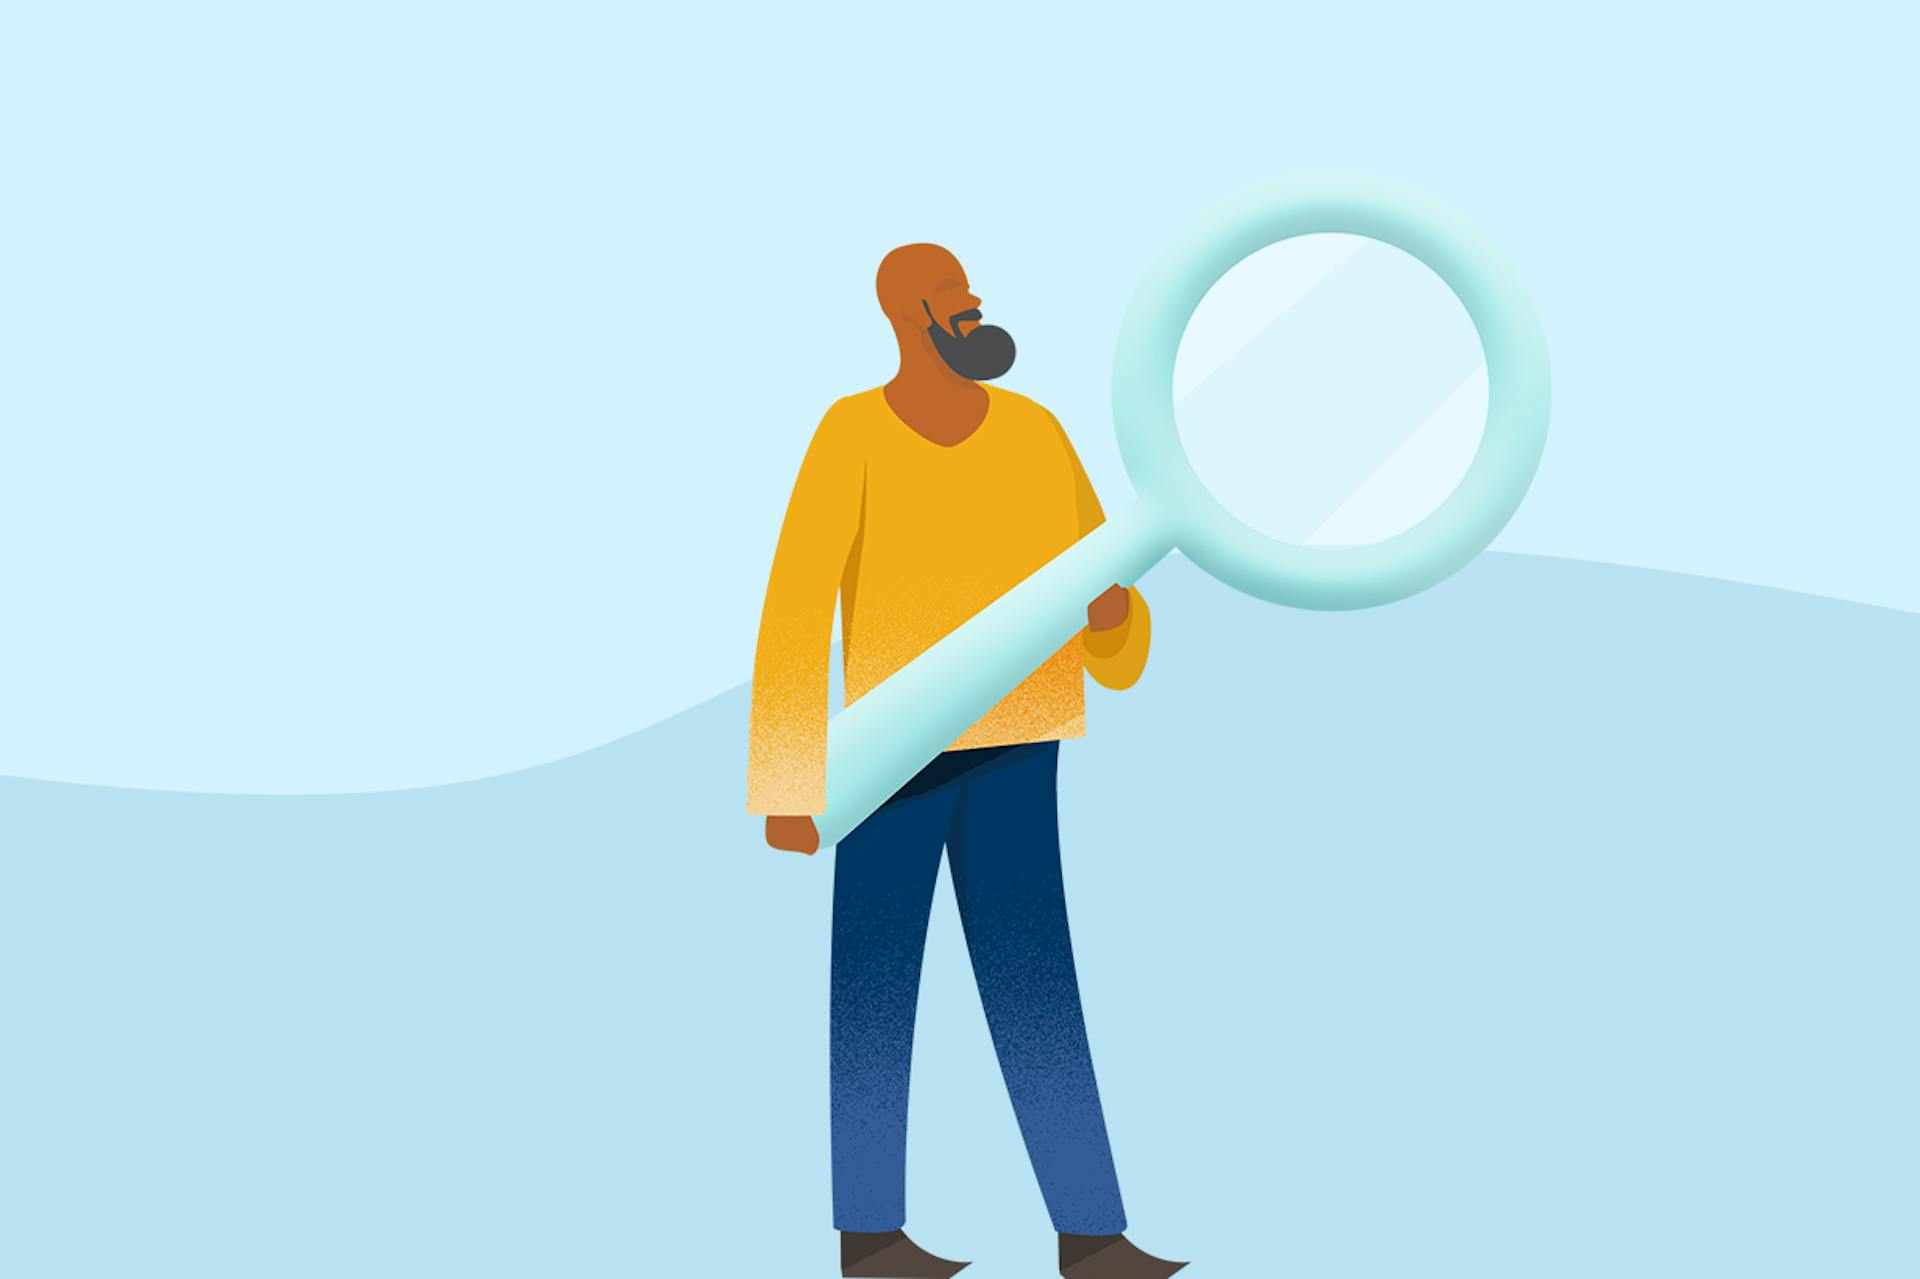 Looking for an alternative social media management solution? This image of a man holding a giant magnifying glass represents how monumental that search can feel. In this blog, we explore alternative social media solutions to Agorapulse.